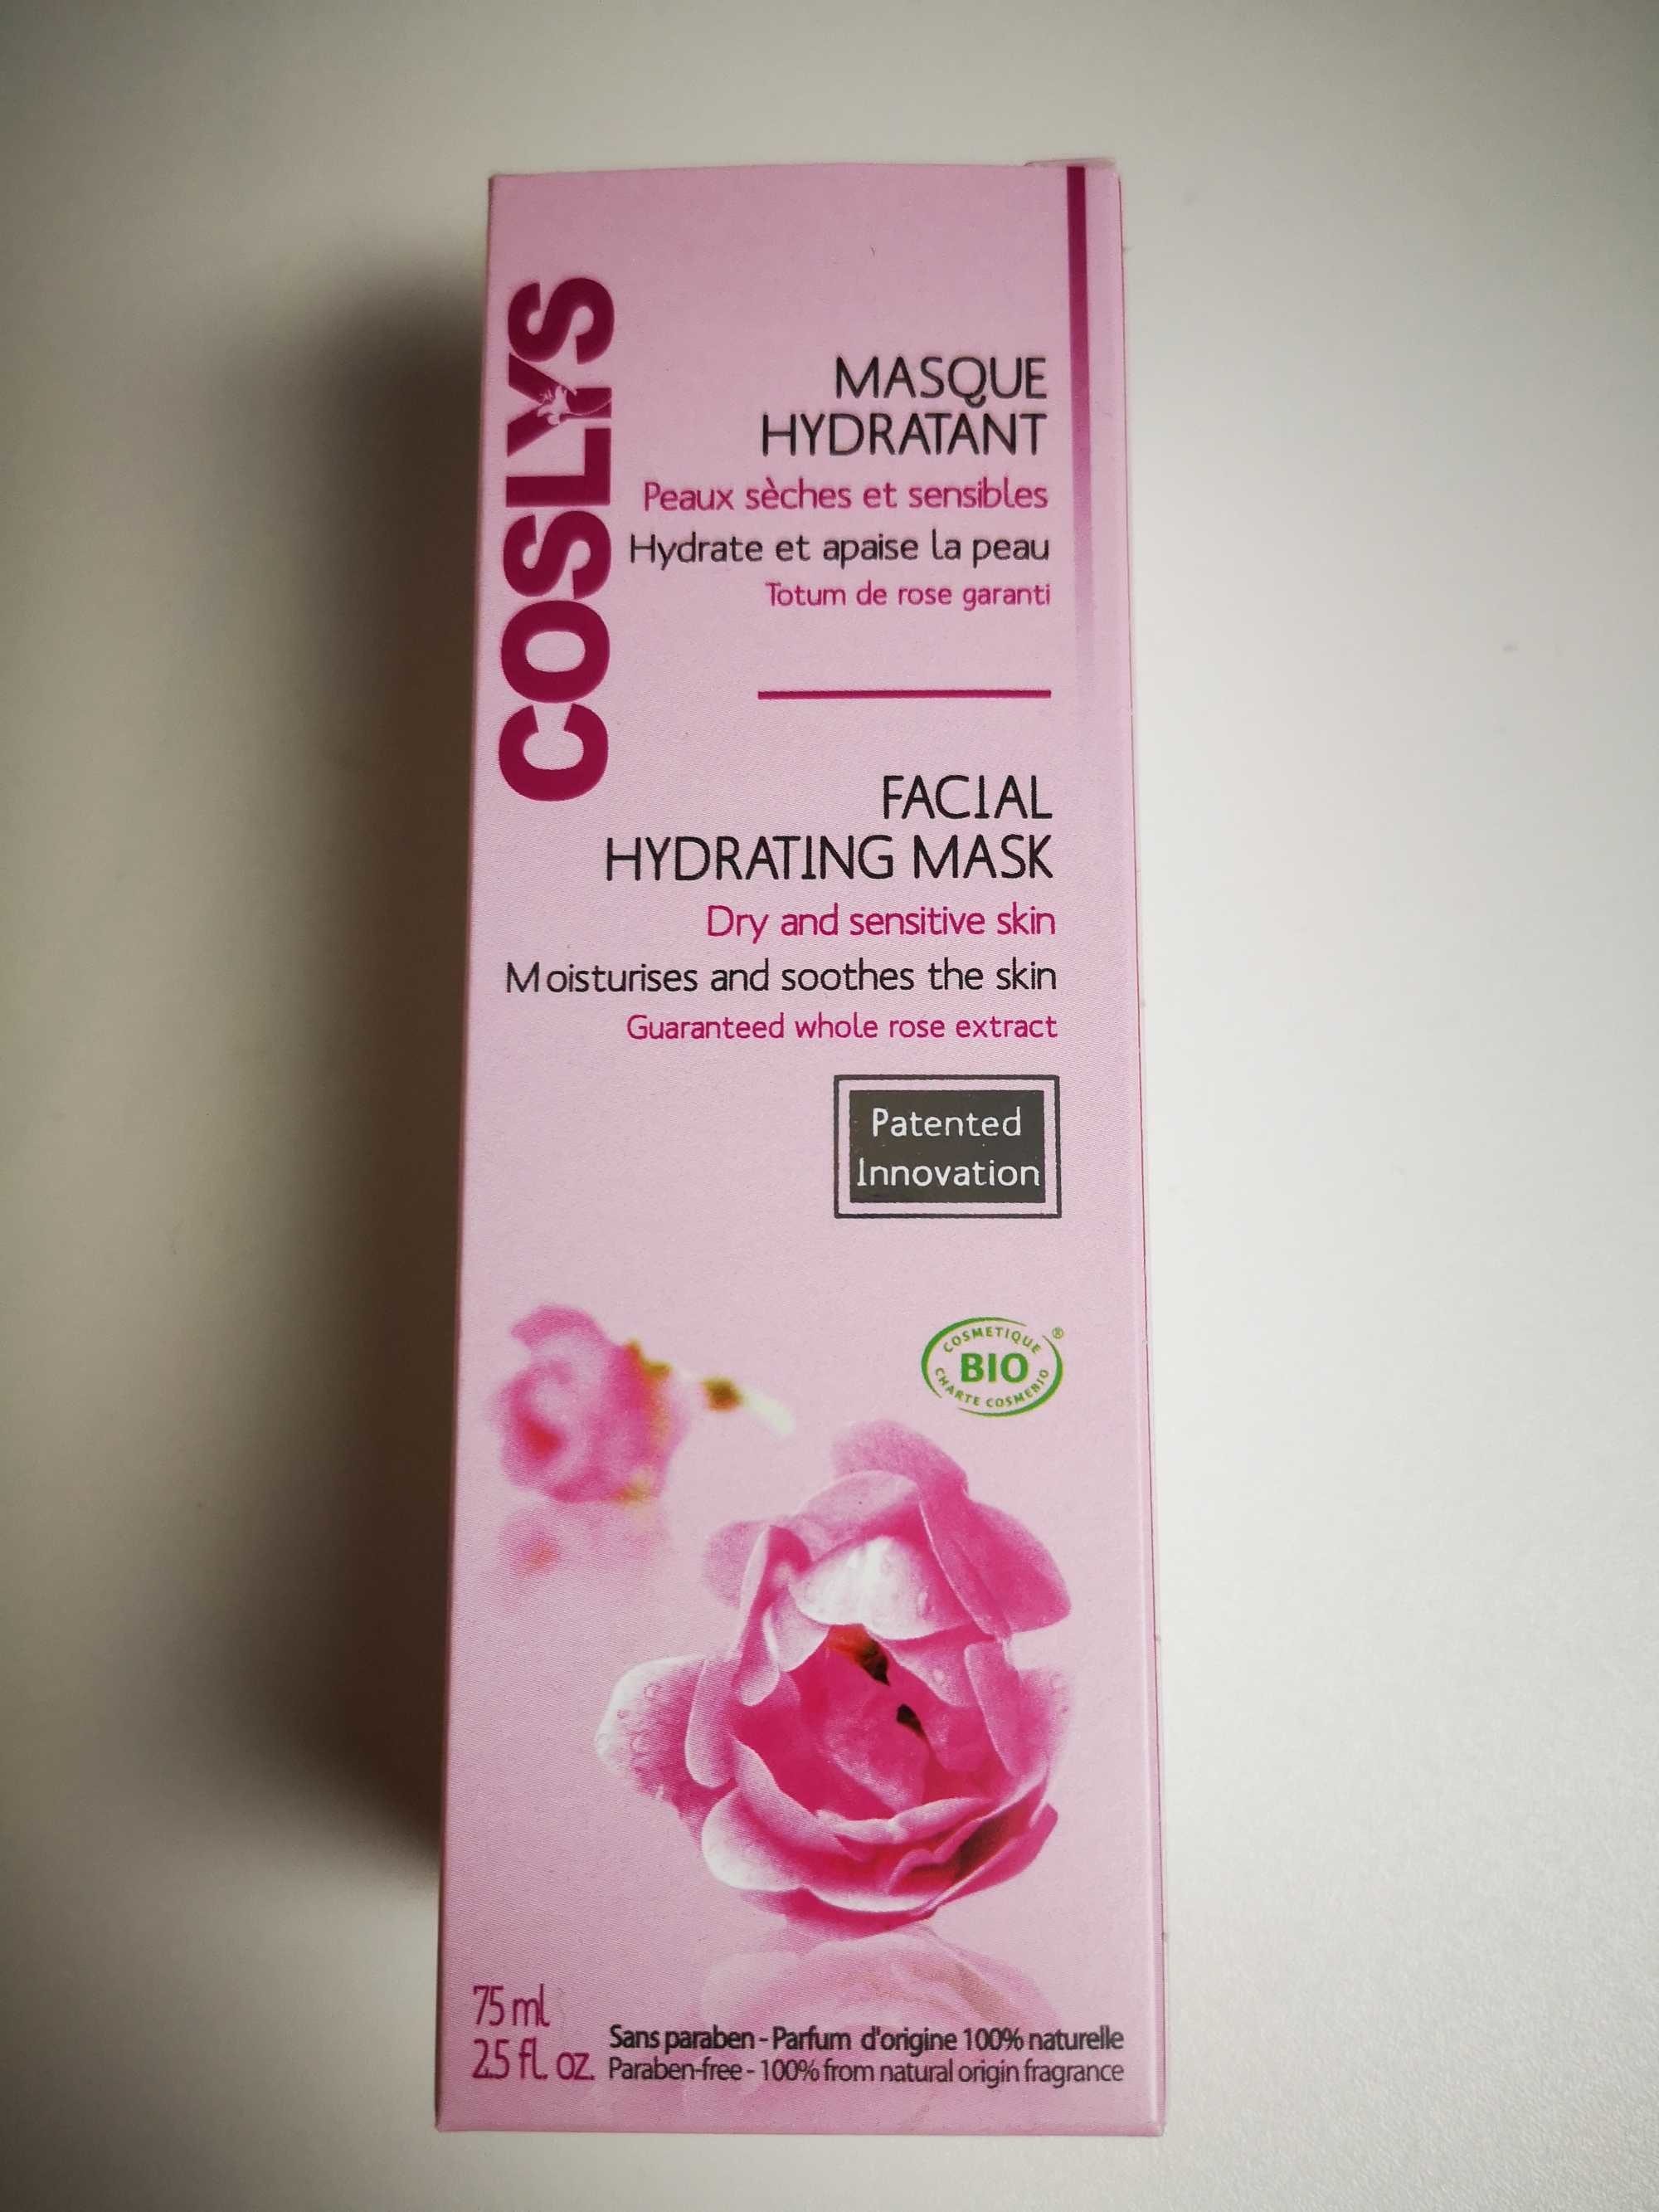 Masque hydratant - Product - fr